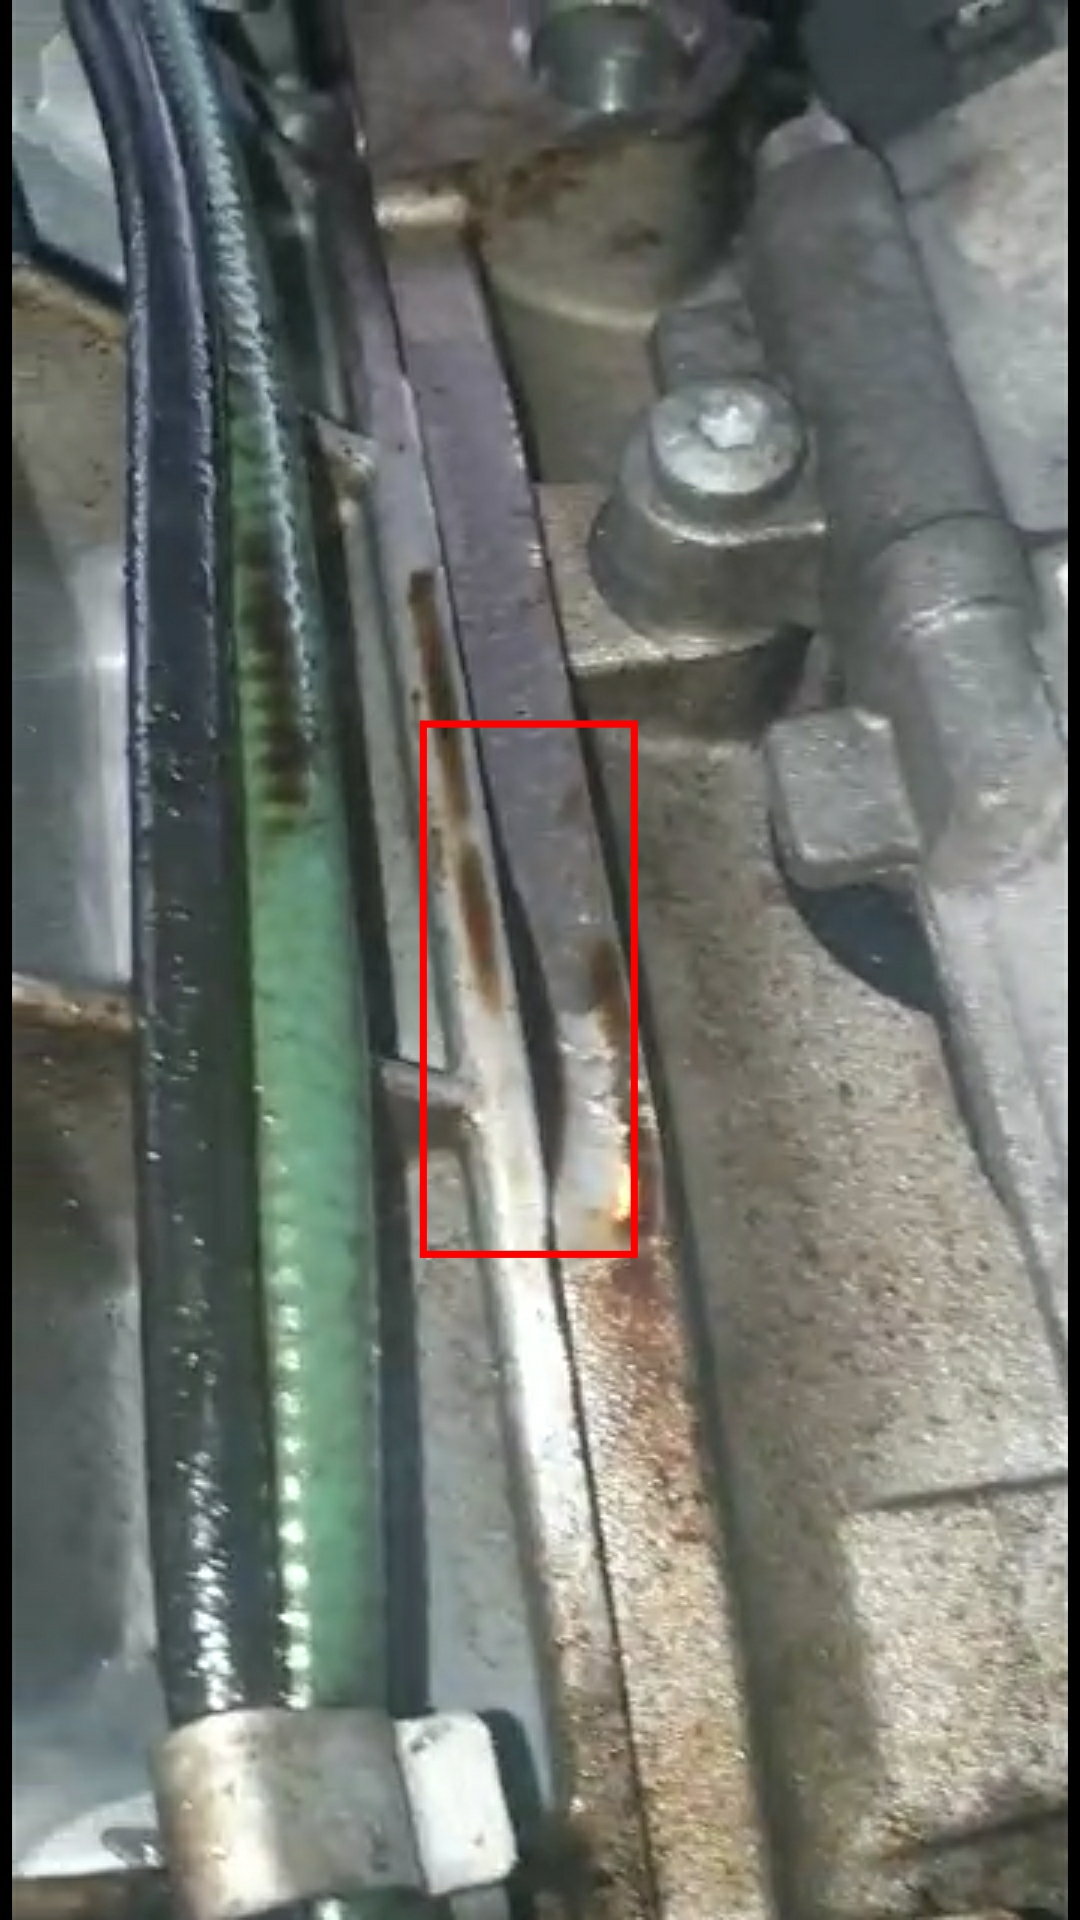 2011 C250 (w204) oil leak in turbo line - Page 2 - MBWorld.org Forums